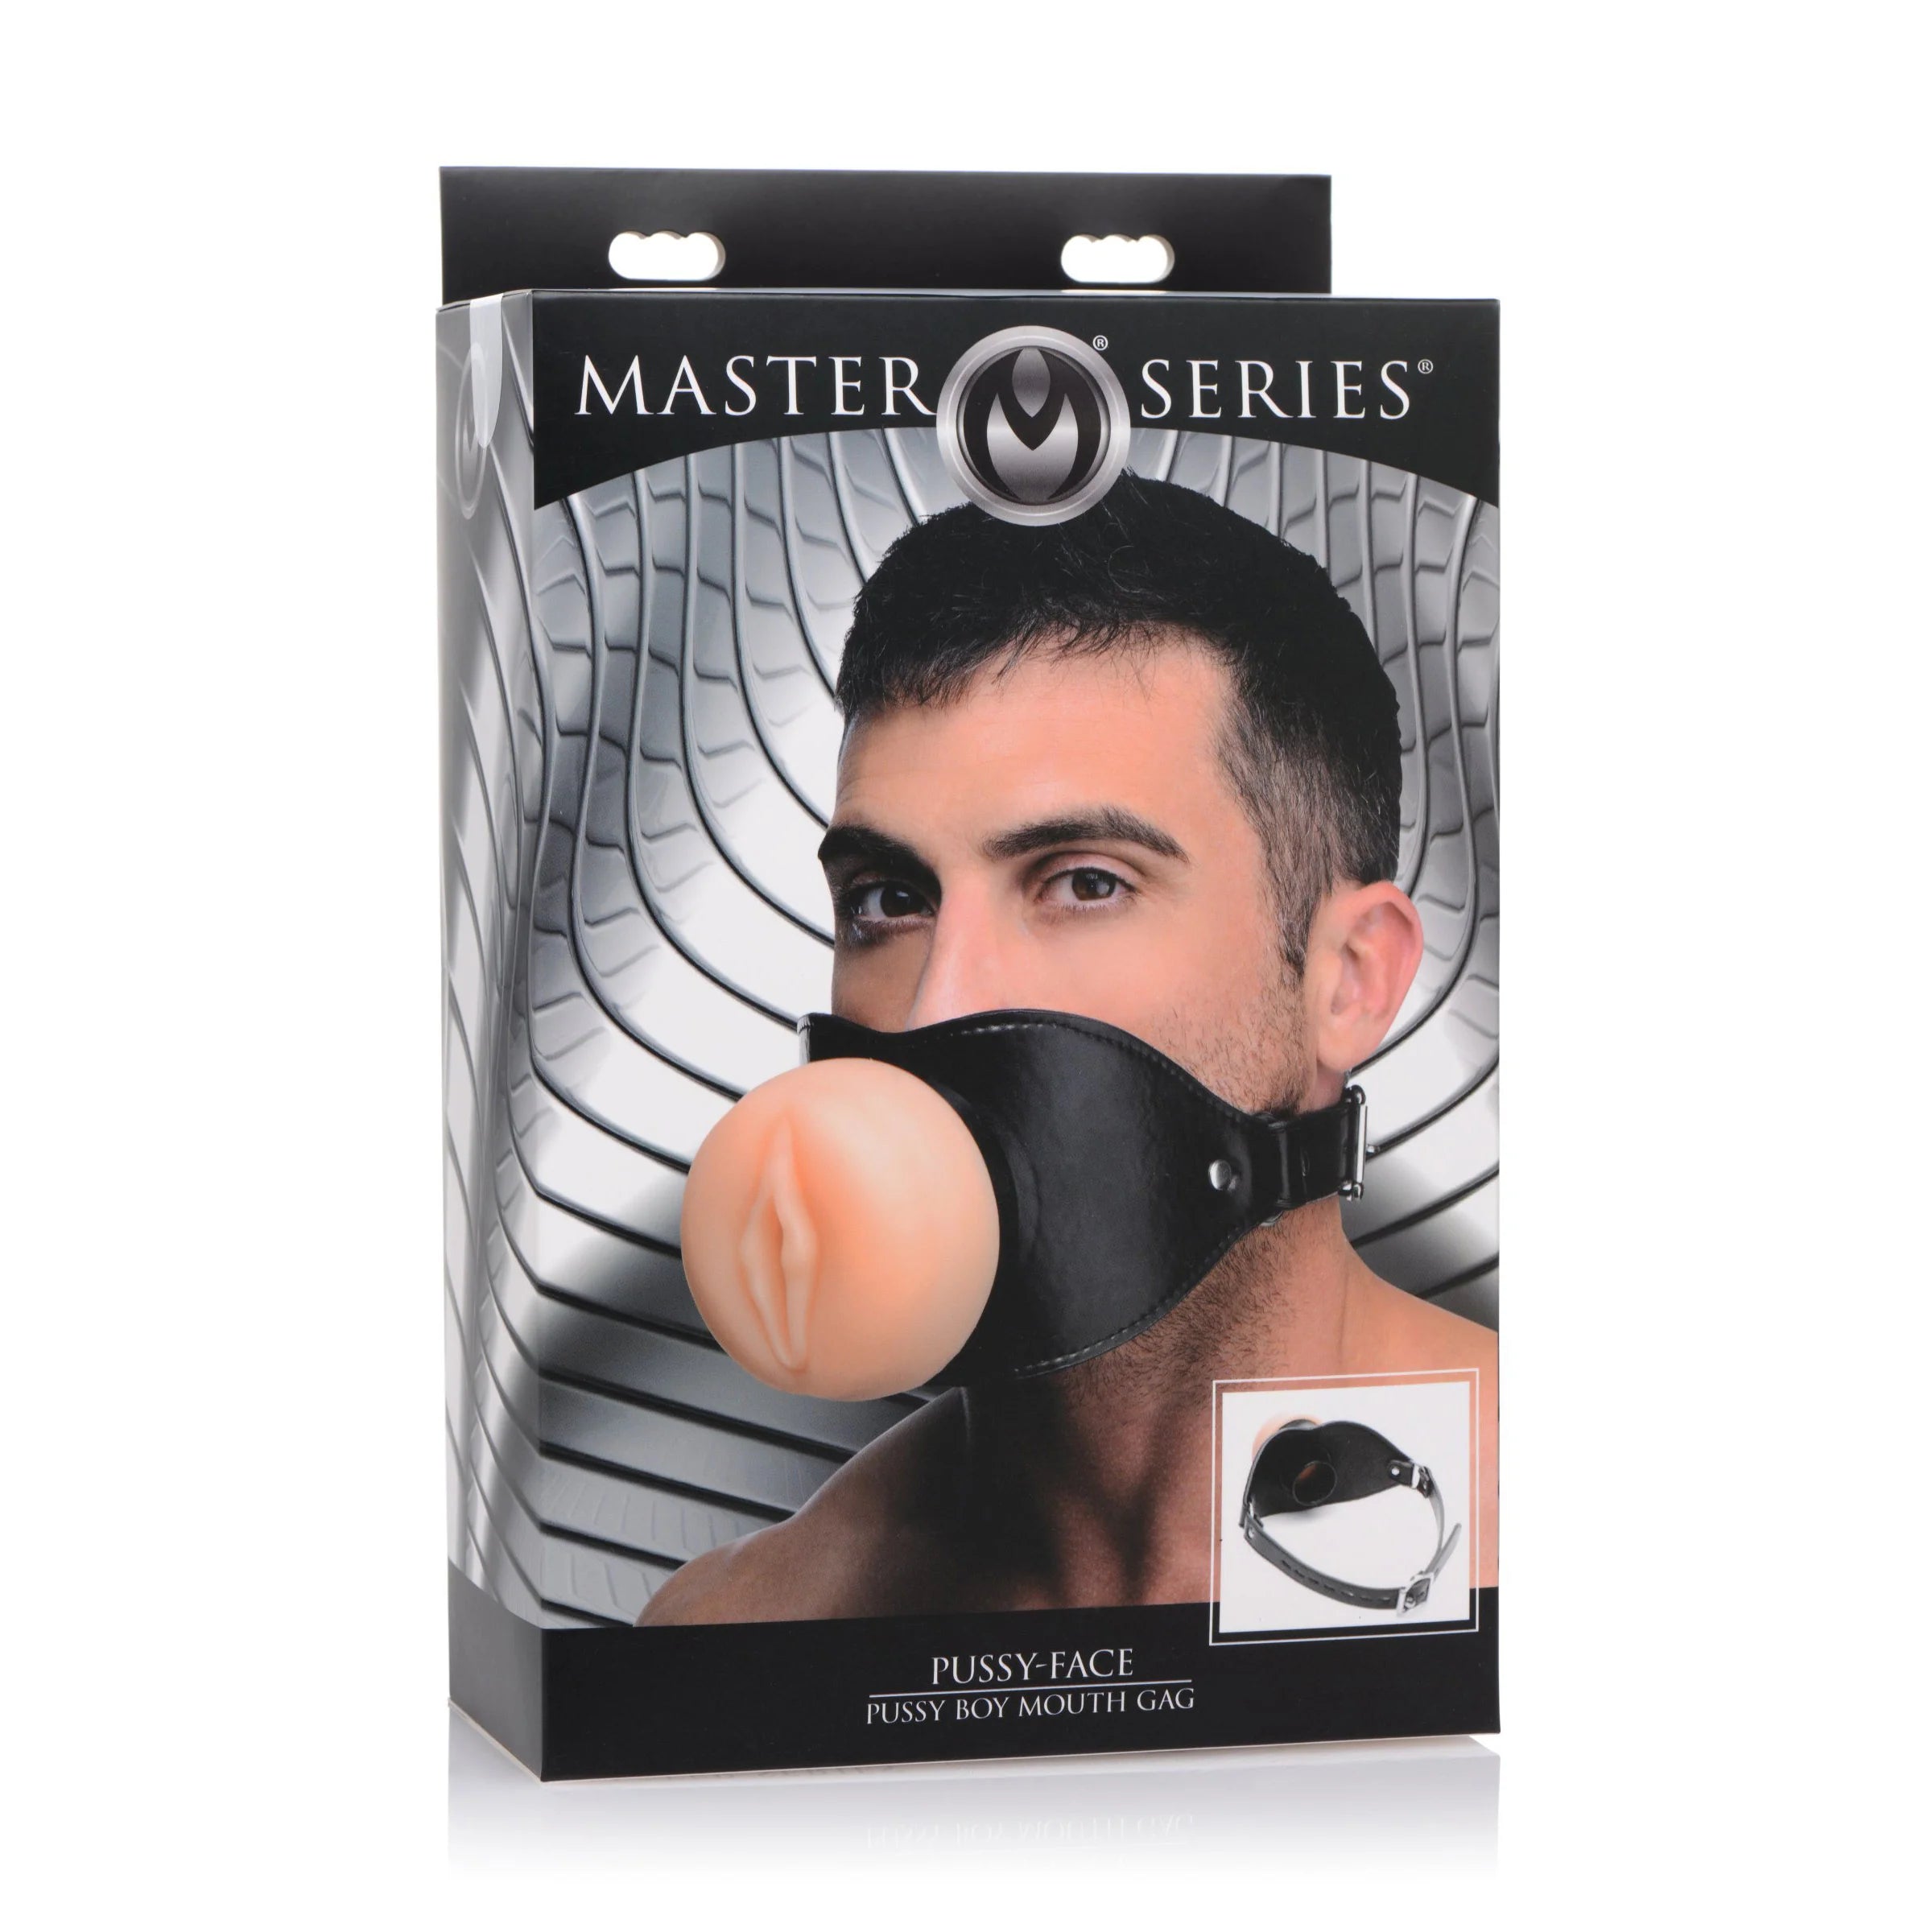 Master Series Pussy Face • Oral Sex Strap On Mouth Gag